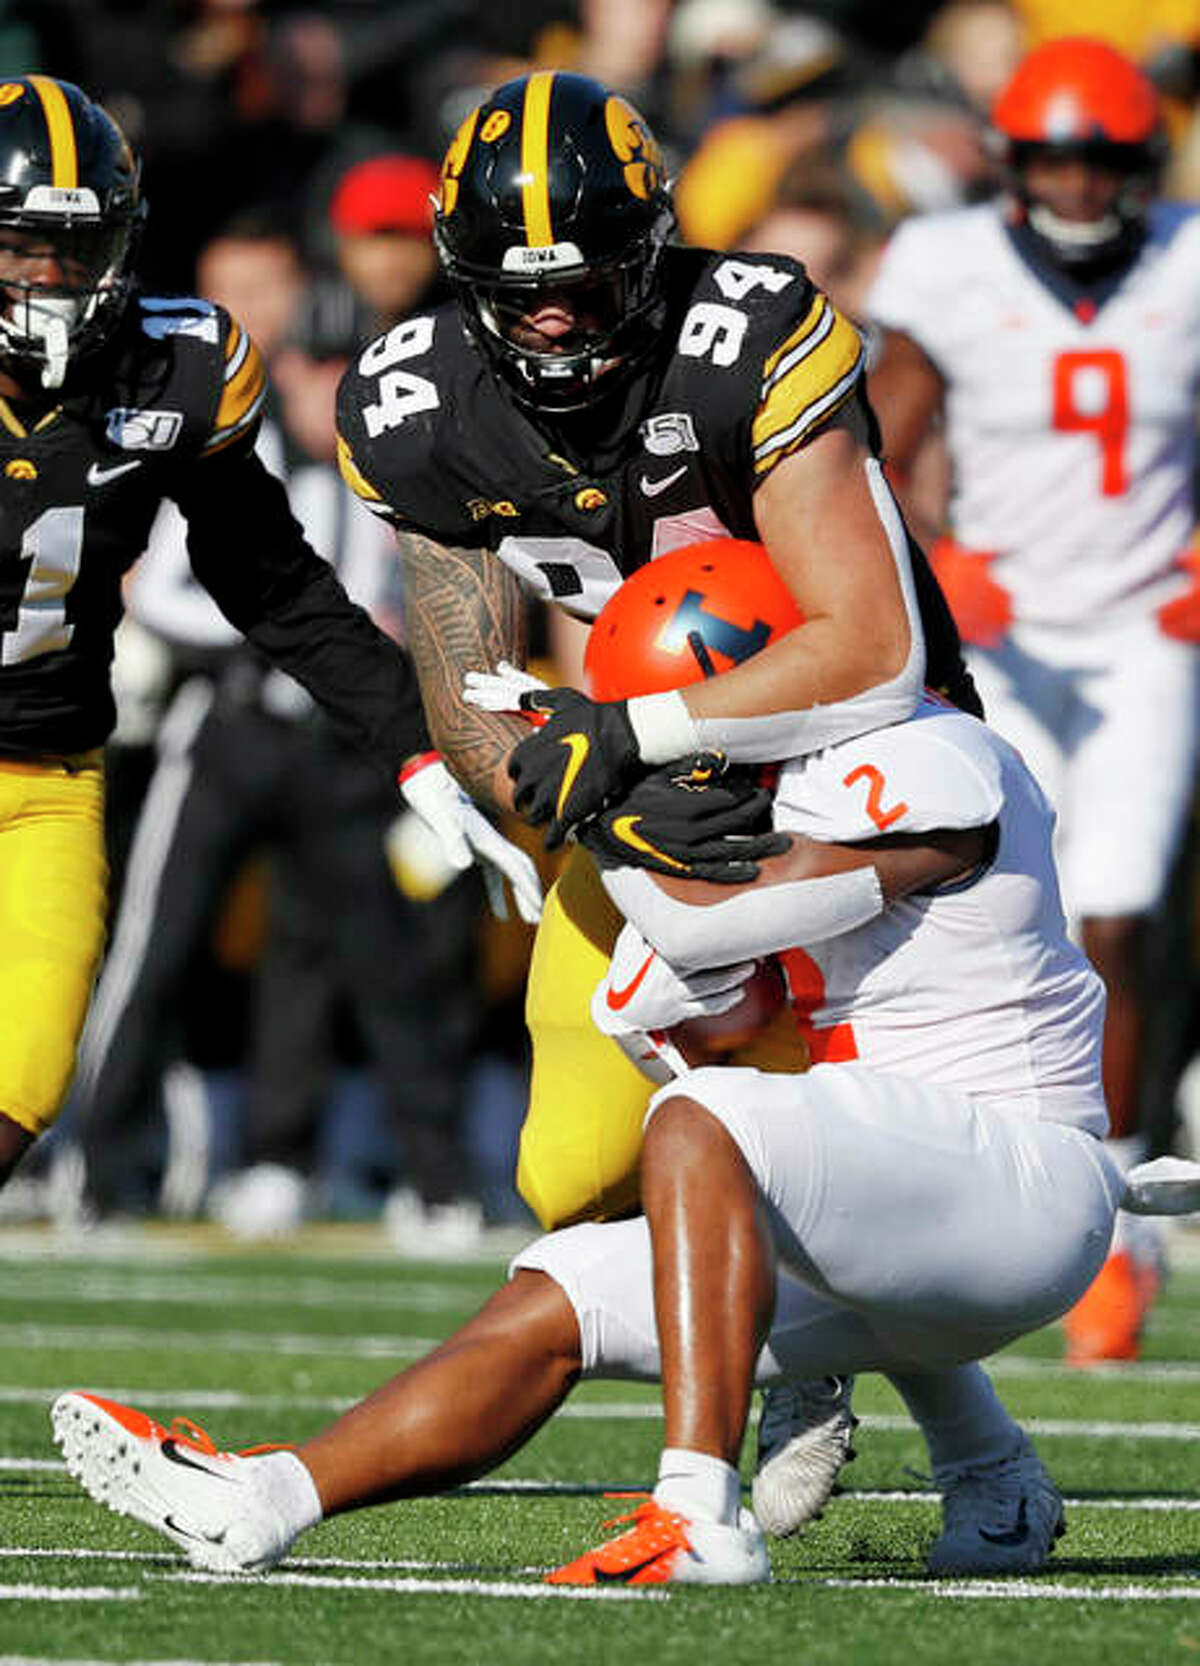 Illinois Reggie Corbin is tackled by Iowa defensive end A.J. Epenesa (94), a junior from Edwardsville, during the first half Saturday in Iowa City, Iowa.